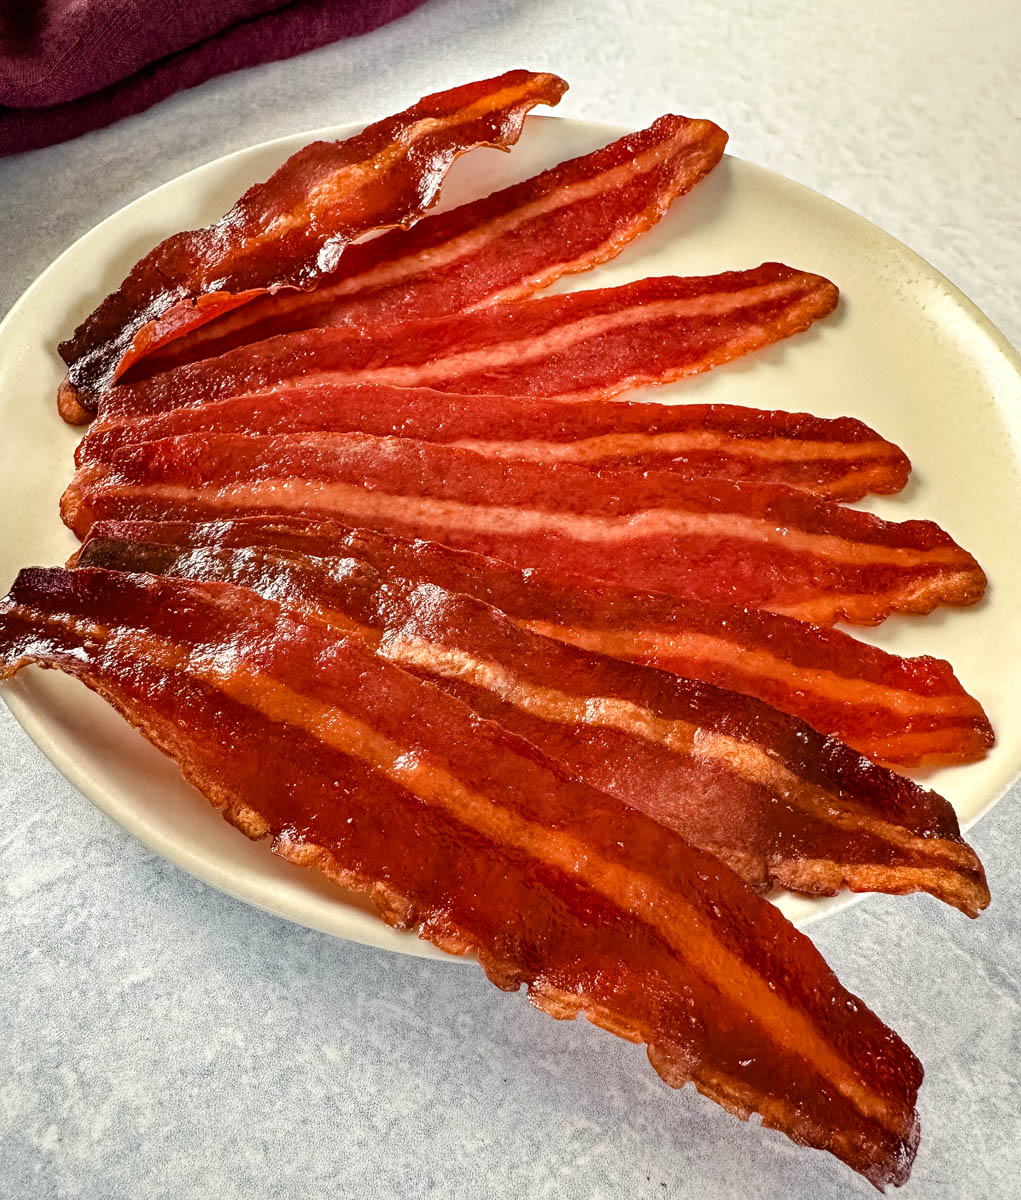 https://www.staysnatched.com/wp-content/uploads/2023/01/how-to-bake-turkey-bacon-recipe-5-1.jpg